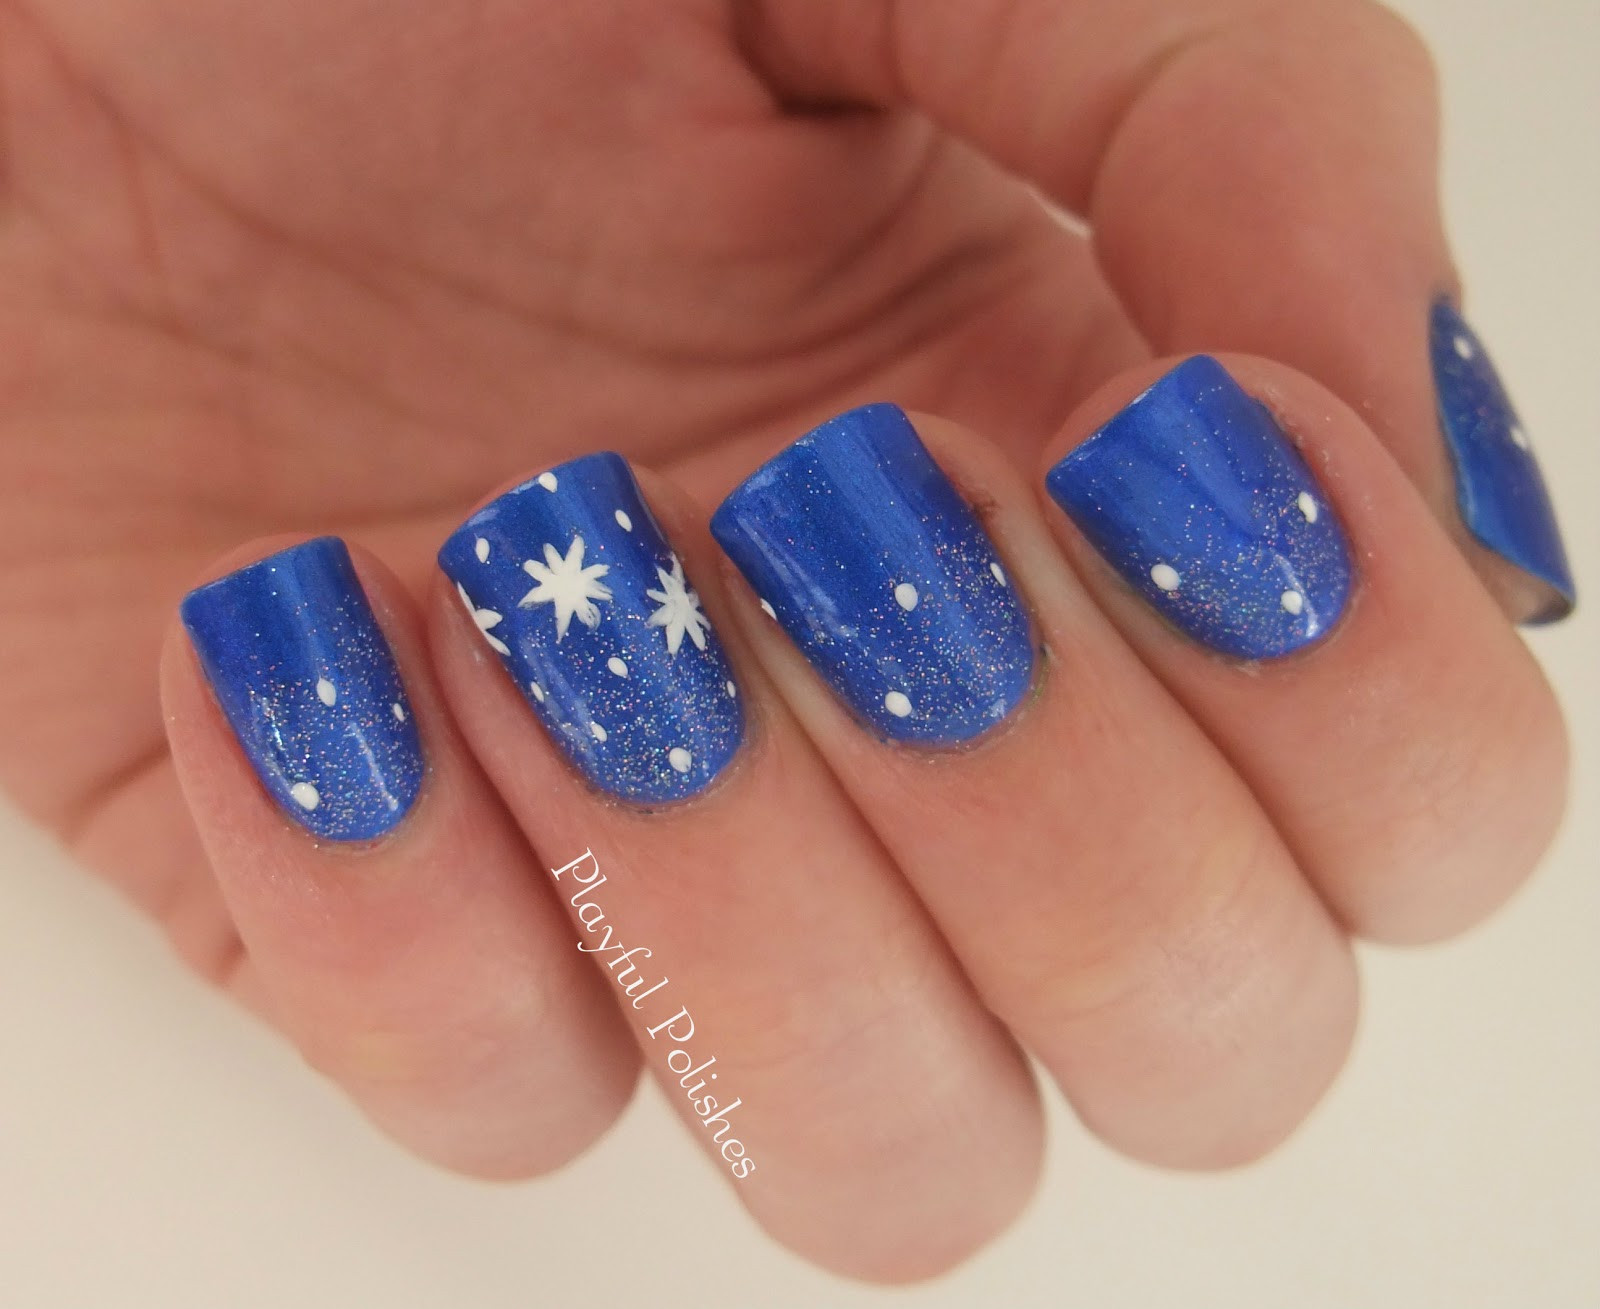 8. "January Nail Trends and Ideas" - wide 4